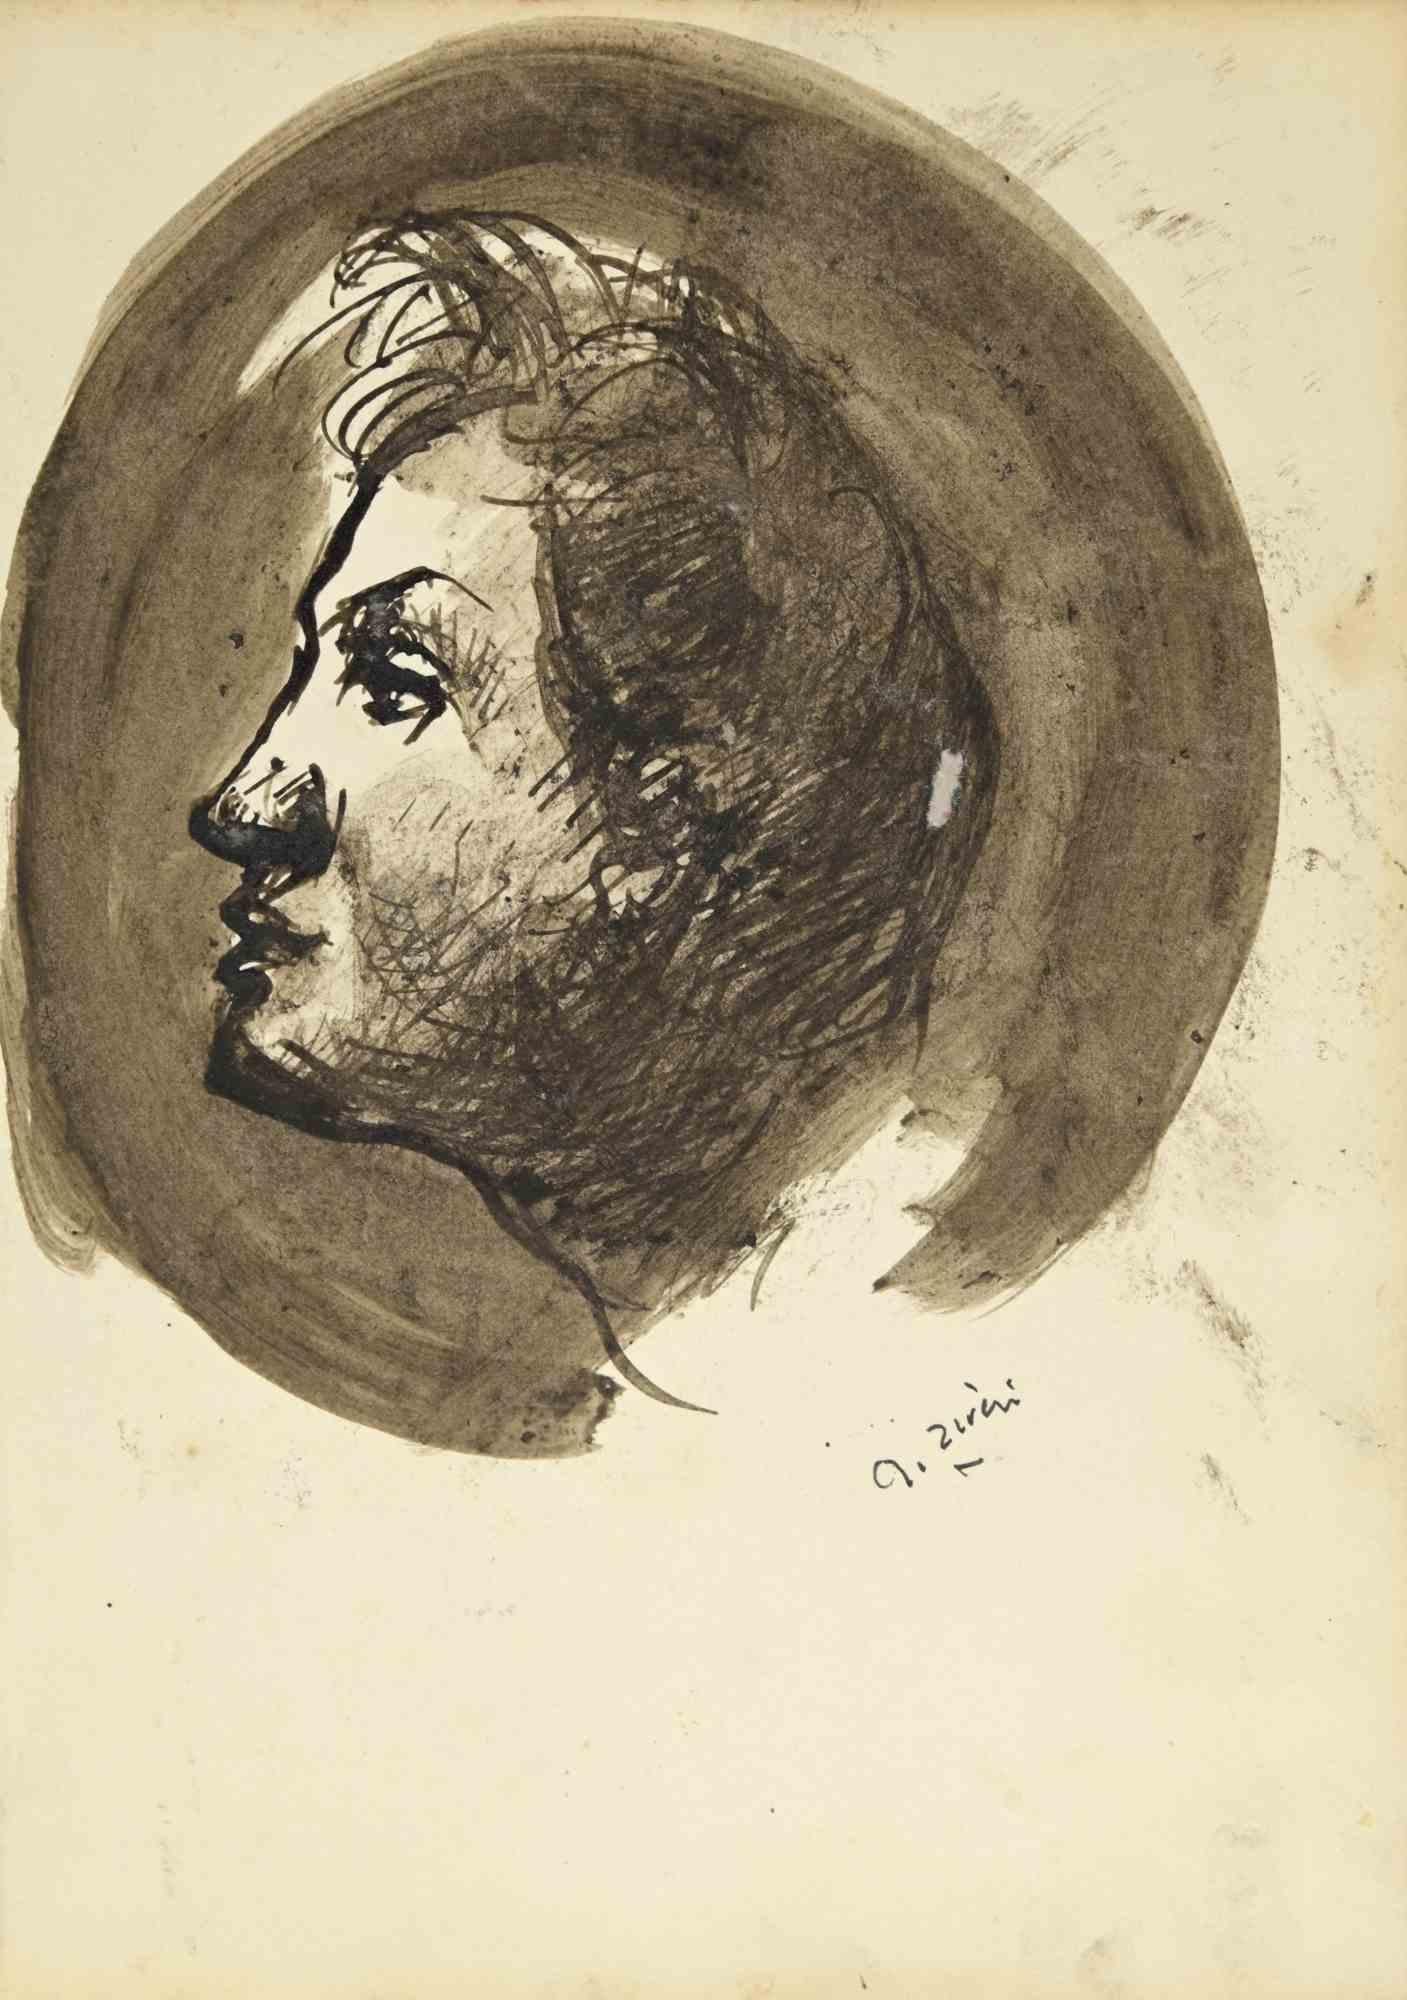 The Profile is a drawing realized by Alberto Ziveri in the 1930s.

Ink and watercolor on paper.

Hand-signed.

In good condition.

The artwork is represented through deft strokes masterly.

Alberto Ziveri (Rome,1908 – 1990), the Italian painter of